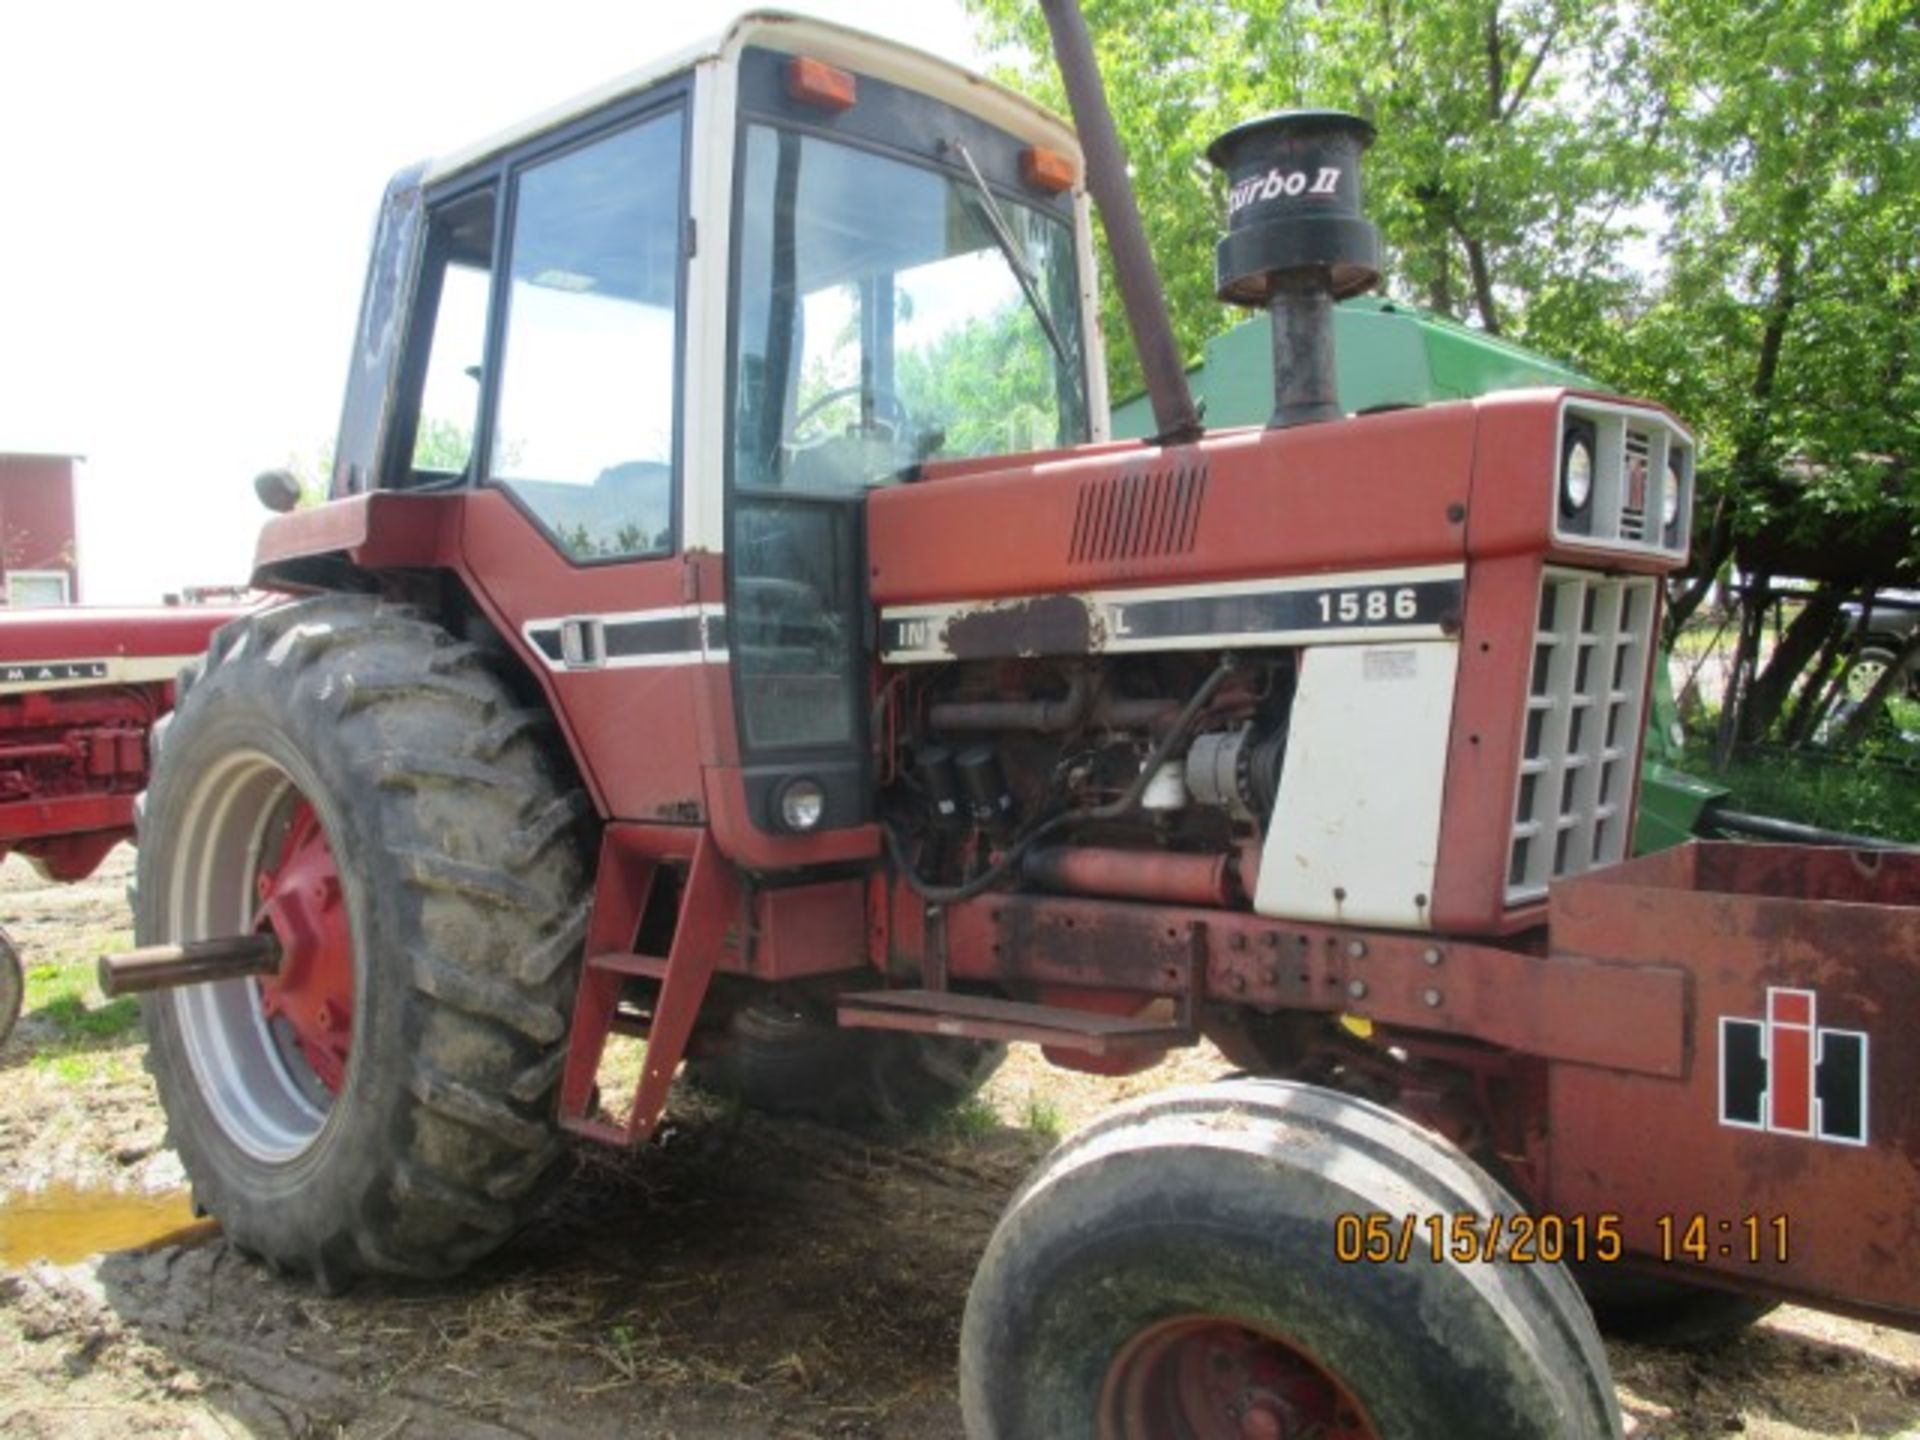 IH 1586, cab, wf, pto, 20.8-38 rubber, 5697-hrs on meter, turbo has oil leak, window out of cab - Image 2 of 3